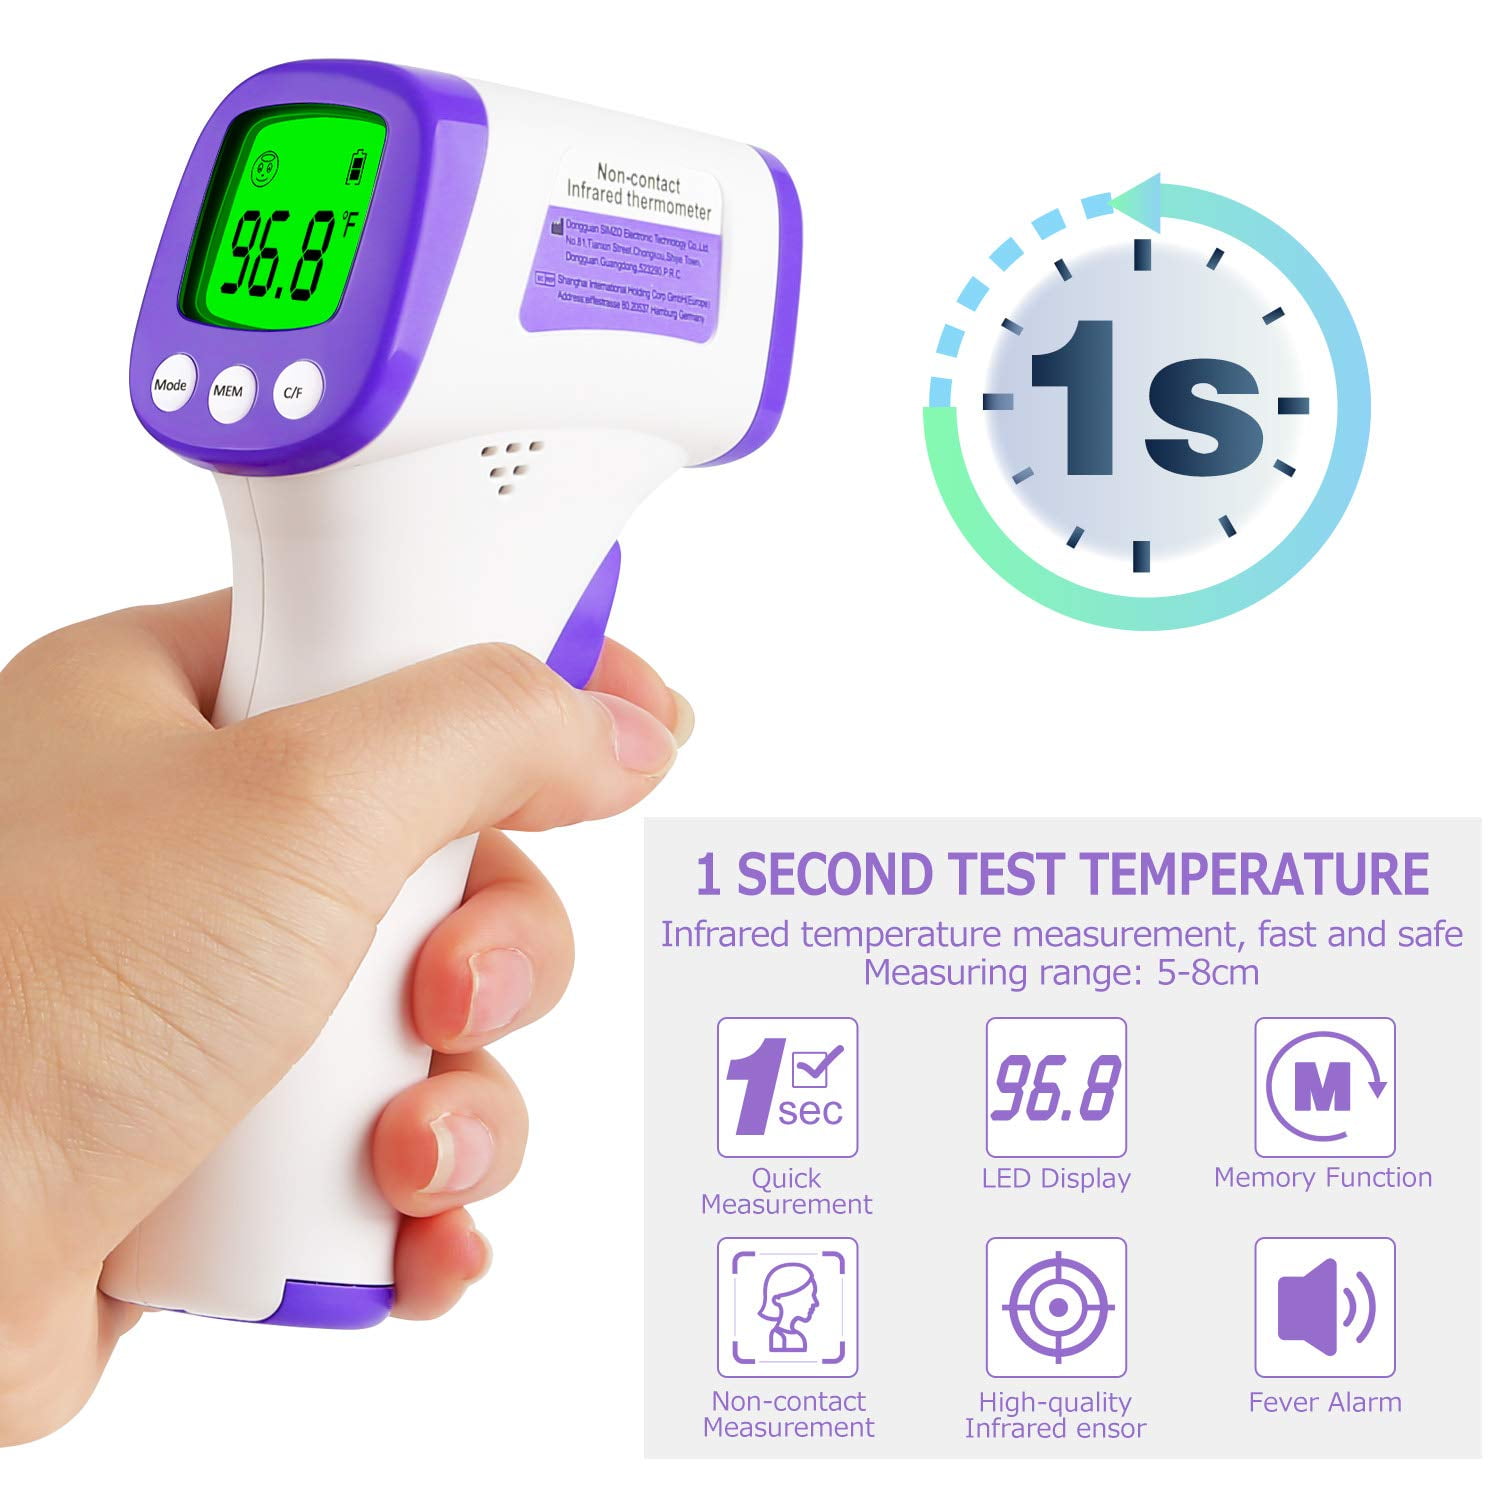 THERMAL INFRARED IR IN STOCK CONTACTLESS THERMOMETER Details about   HANDHELD 